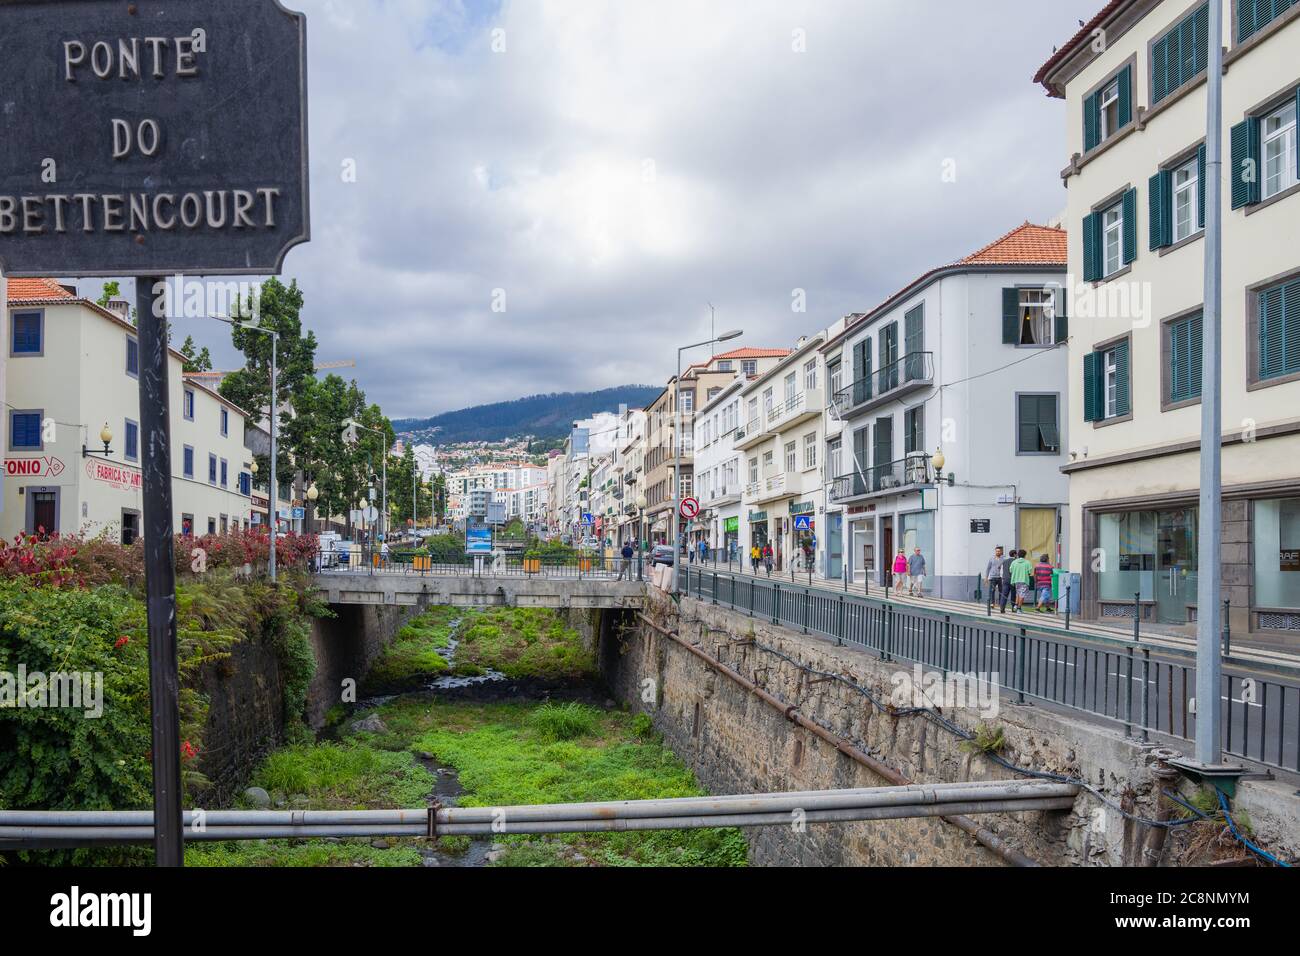 Ponte Do Bettencourt, Funchal, Madeira on a cloudy day. Stock Photo